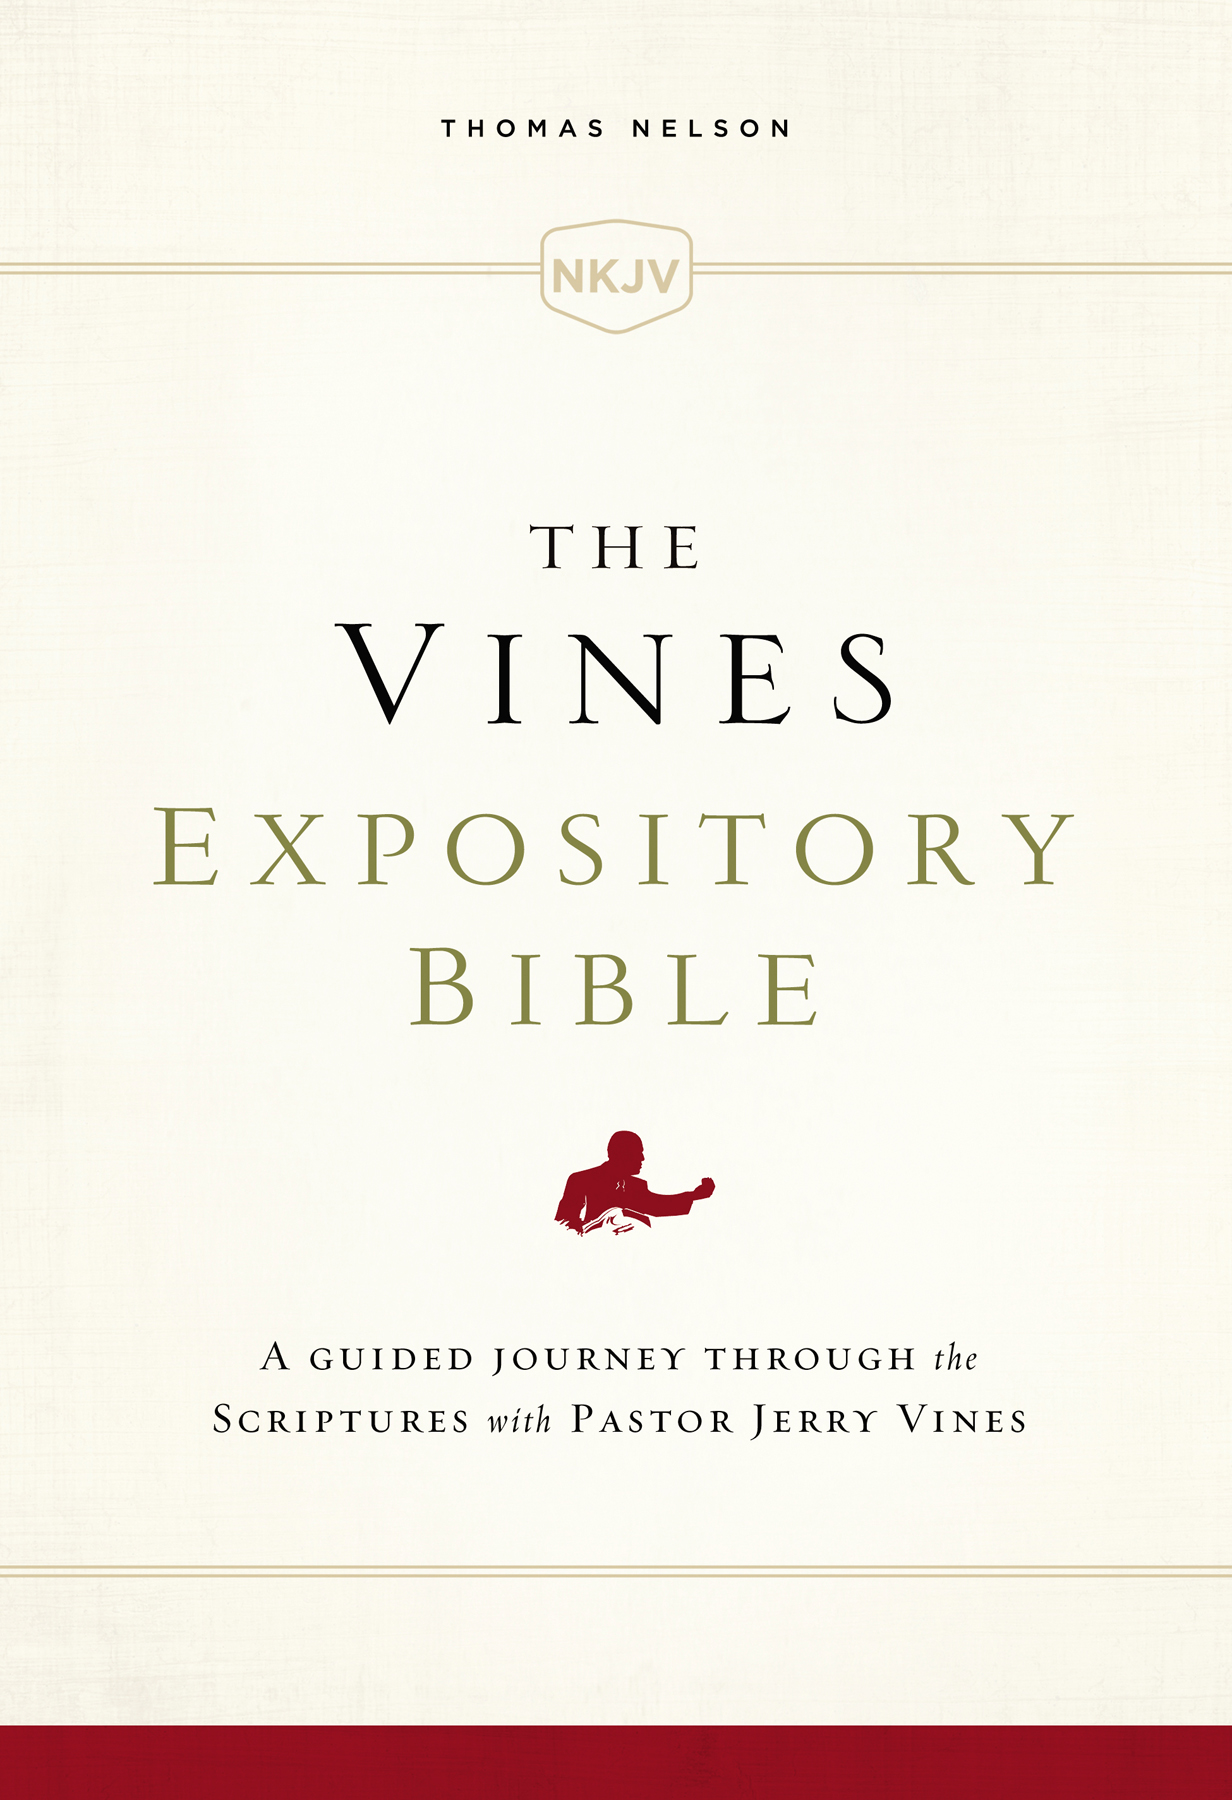 The Vines Expository Bible NKJV - image 1